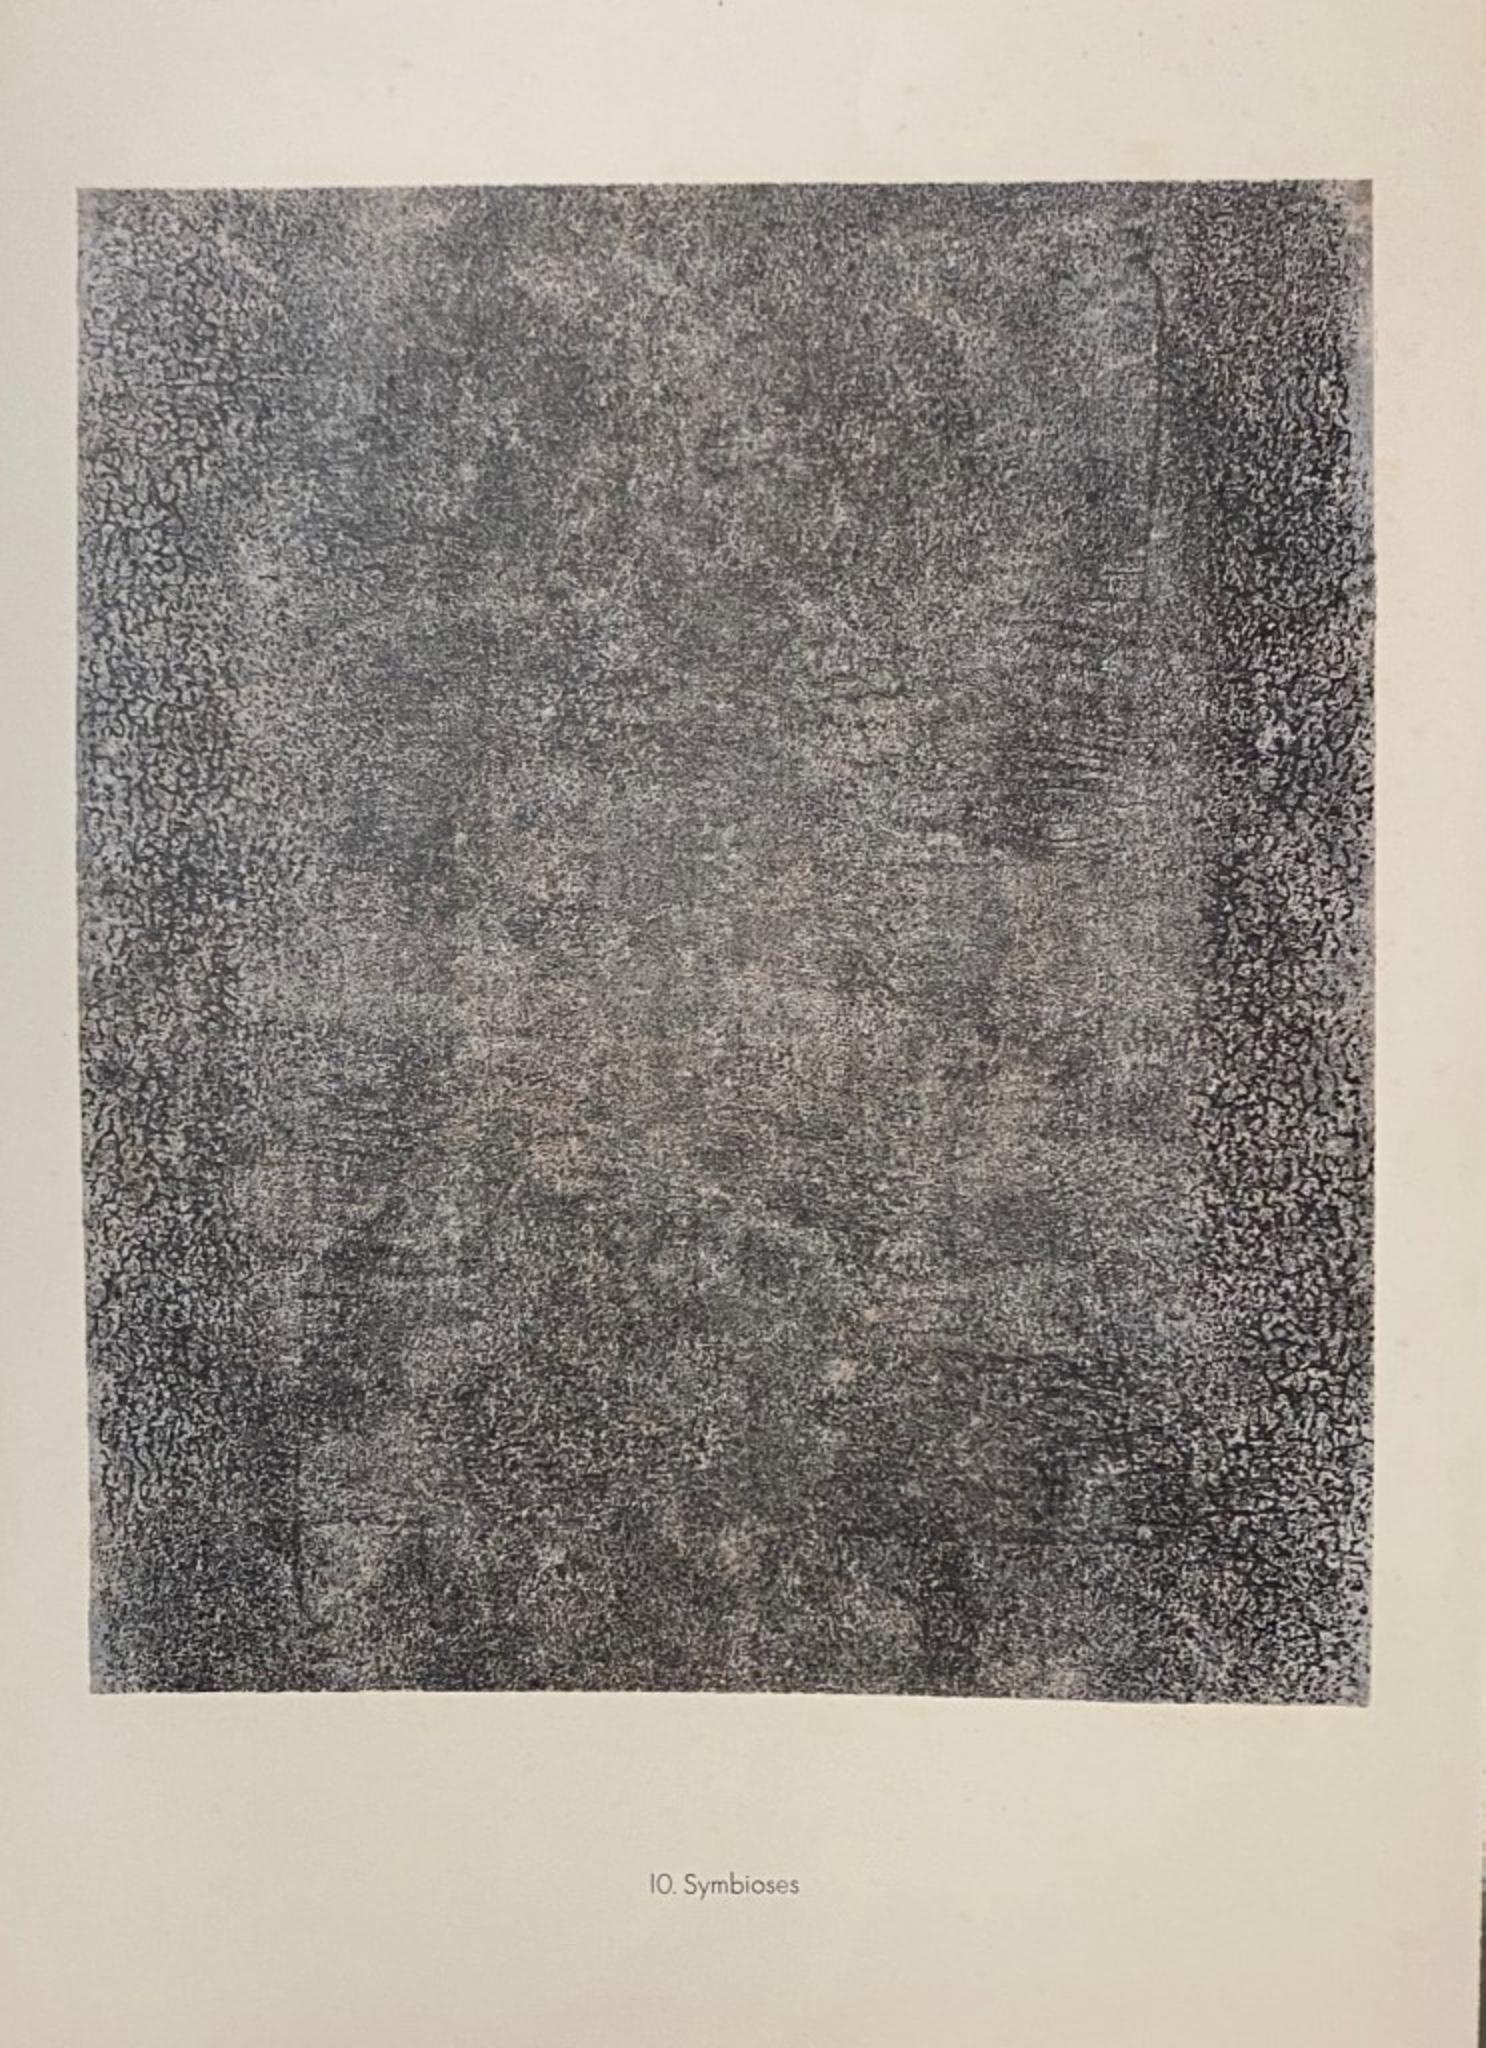 Symbioses is an original B/W lithograph on watermarked paper "Arc". 

Abstract composition by the French artist Jean Dubuffet. From the album of "Spectacles" (1953-1959). 

In excellent condition. Limited Edition of 24.

Image Dimensions: 45 x 38.5